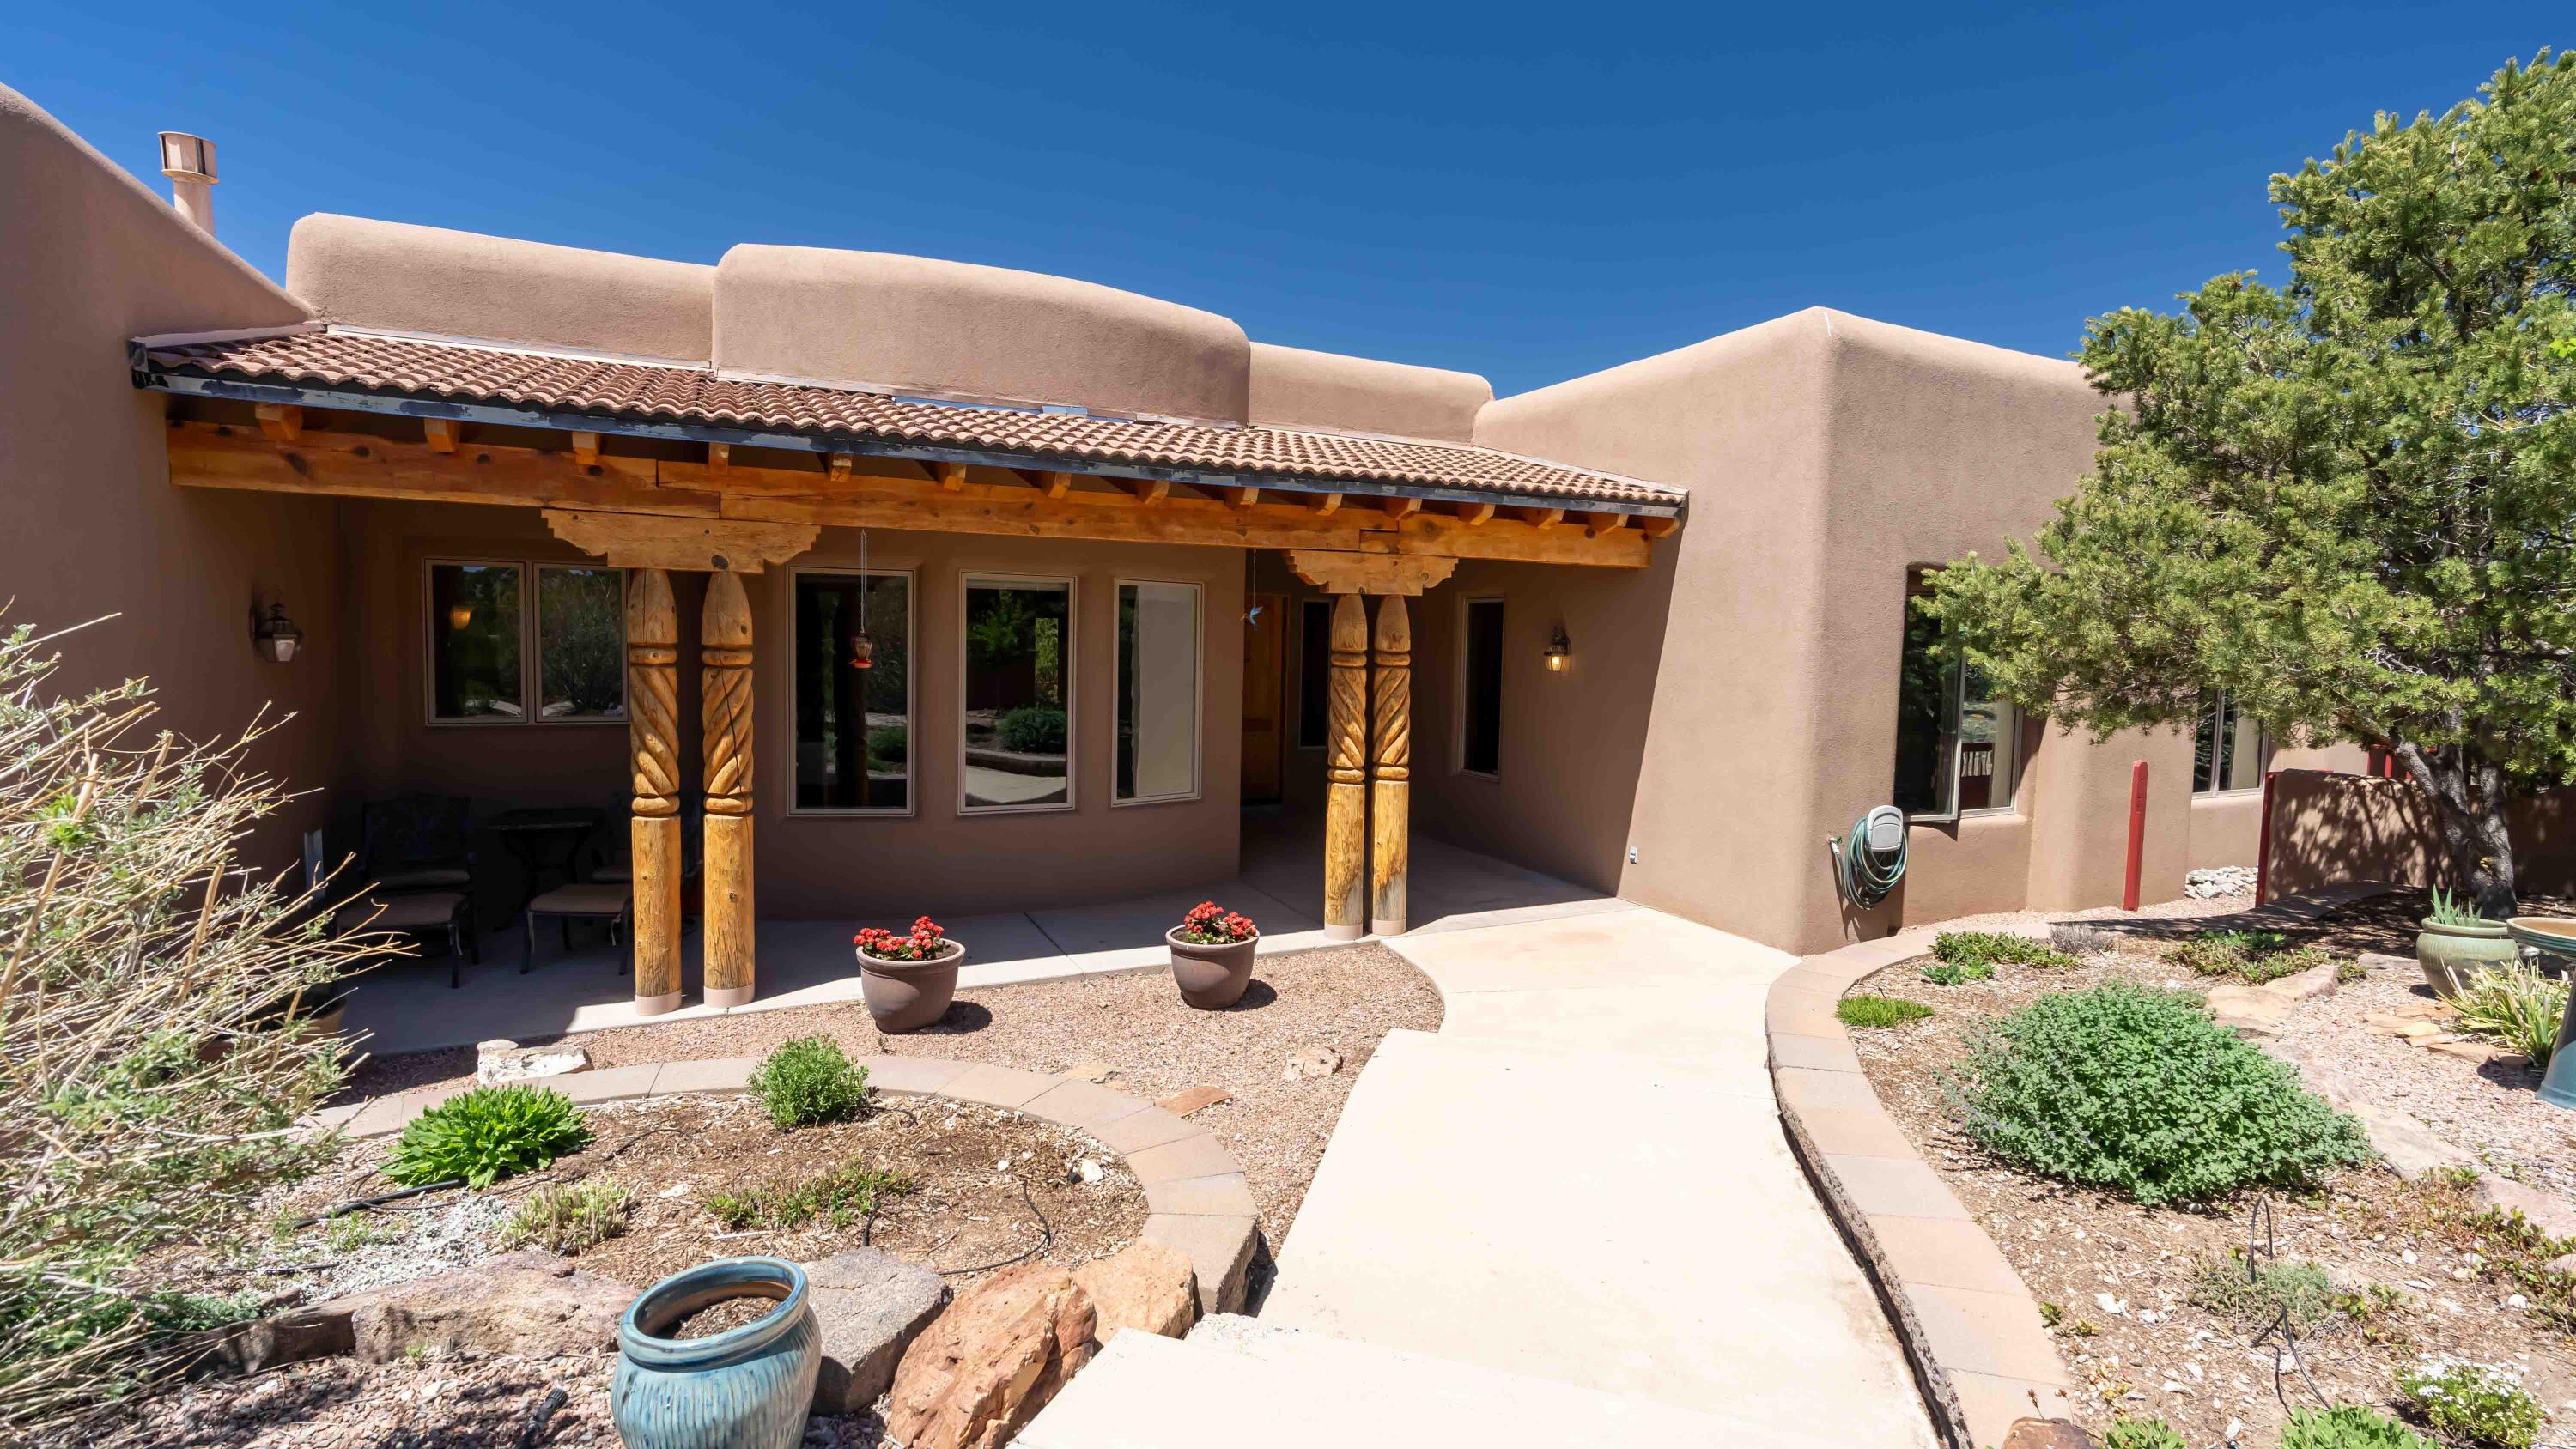 Open house Sun, 5/5, 1-4pm. Experience the charm of this stunning southwestern home located on a private 10-acre estate with breathtaking views of the Sandia Mtns. As you enter the courtyard, you are greeted by a spacious great room featuring beamed ceilings, wood accents, and cozy kiva fireplace. Custom upgraded cabinets in the kitchen & bathrooms add elegance to this beautiful home. This well-designed property boasts 3 good-sized bedrooms as well as a separate office for those who work from home. The primary bedroom features a kiva fireplace, perfect for cozy nights in. Outside, you will find a 3-car garage for your storage needs, a wood shed & dog run. Plenty of space for outdoor activities. Discover the beauty & tranquility of this one-of-a-kind southwestern oasis.